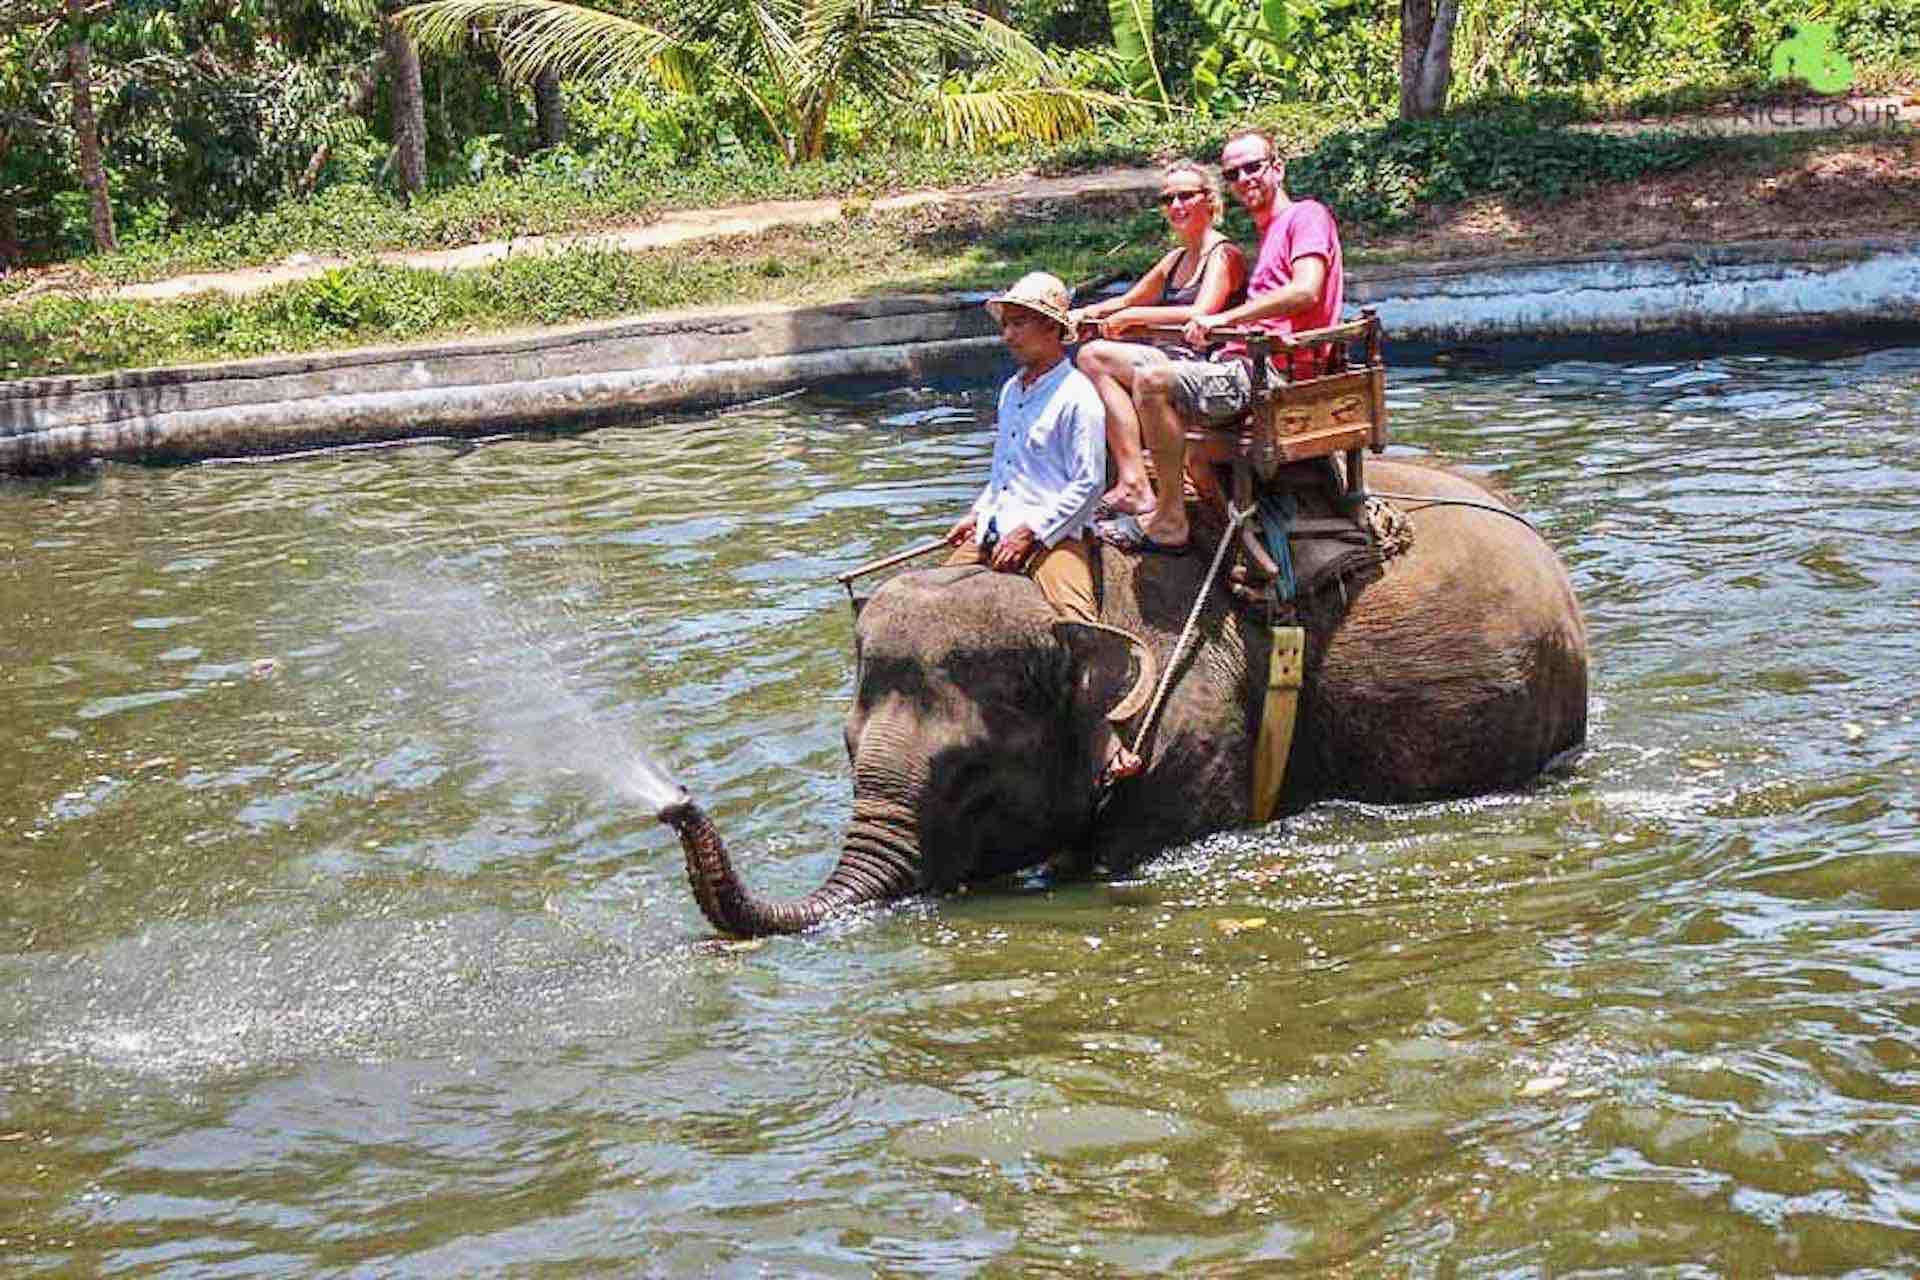 Bali elephant ride in river with guests